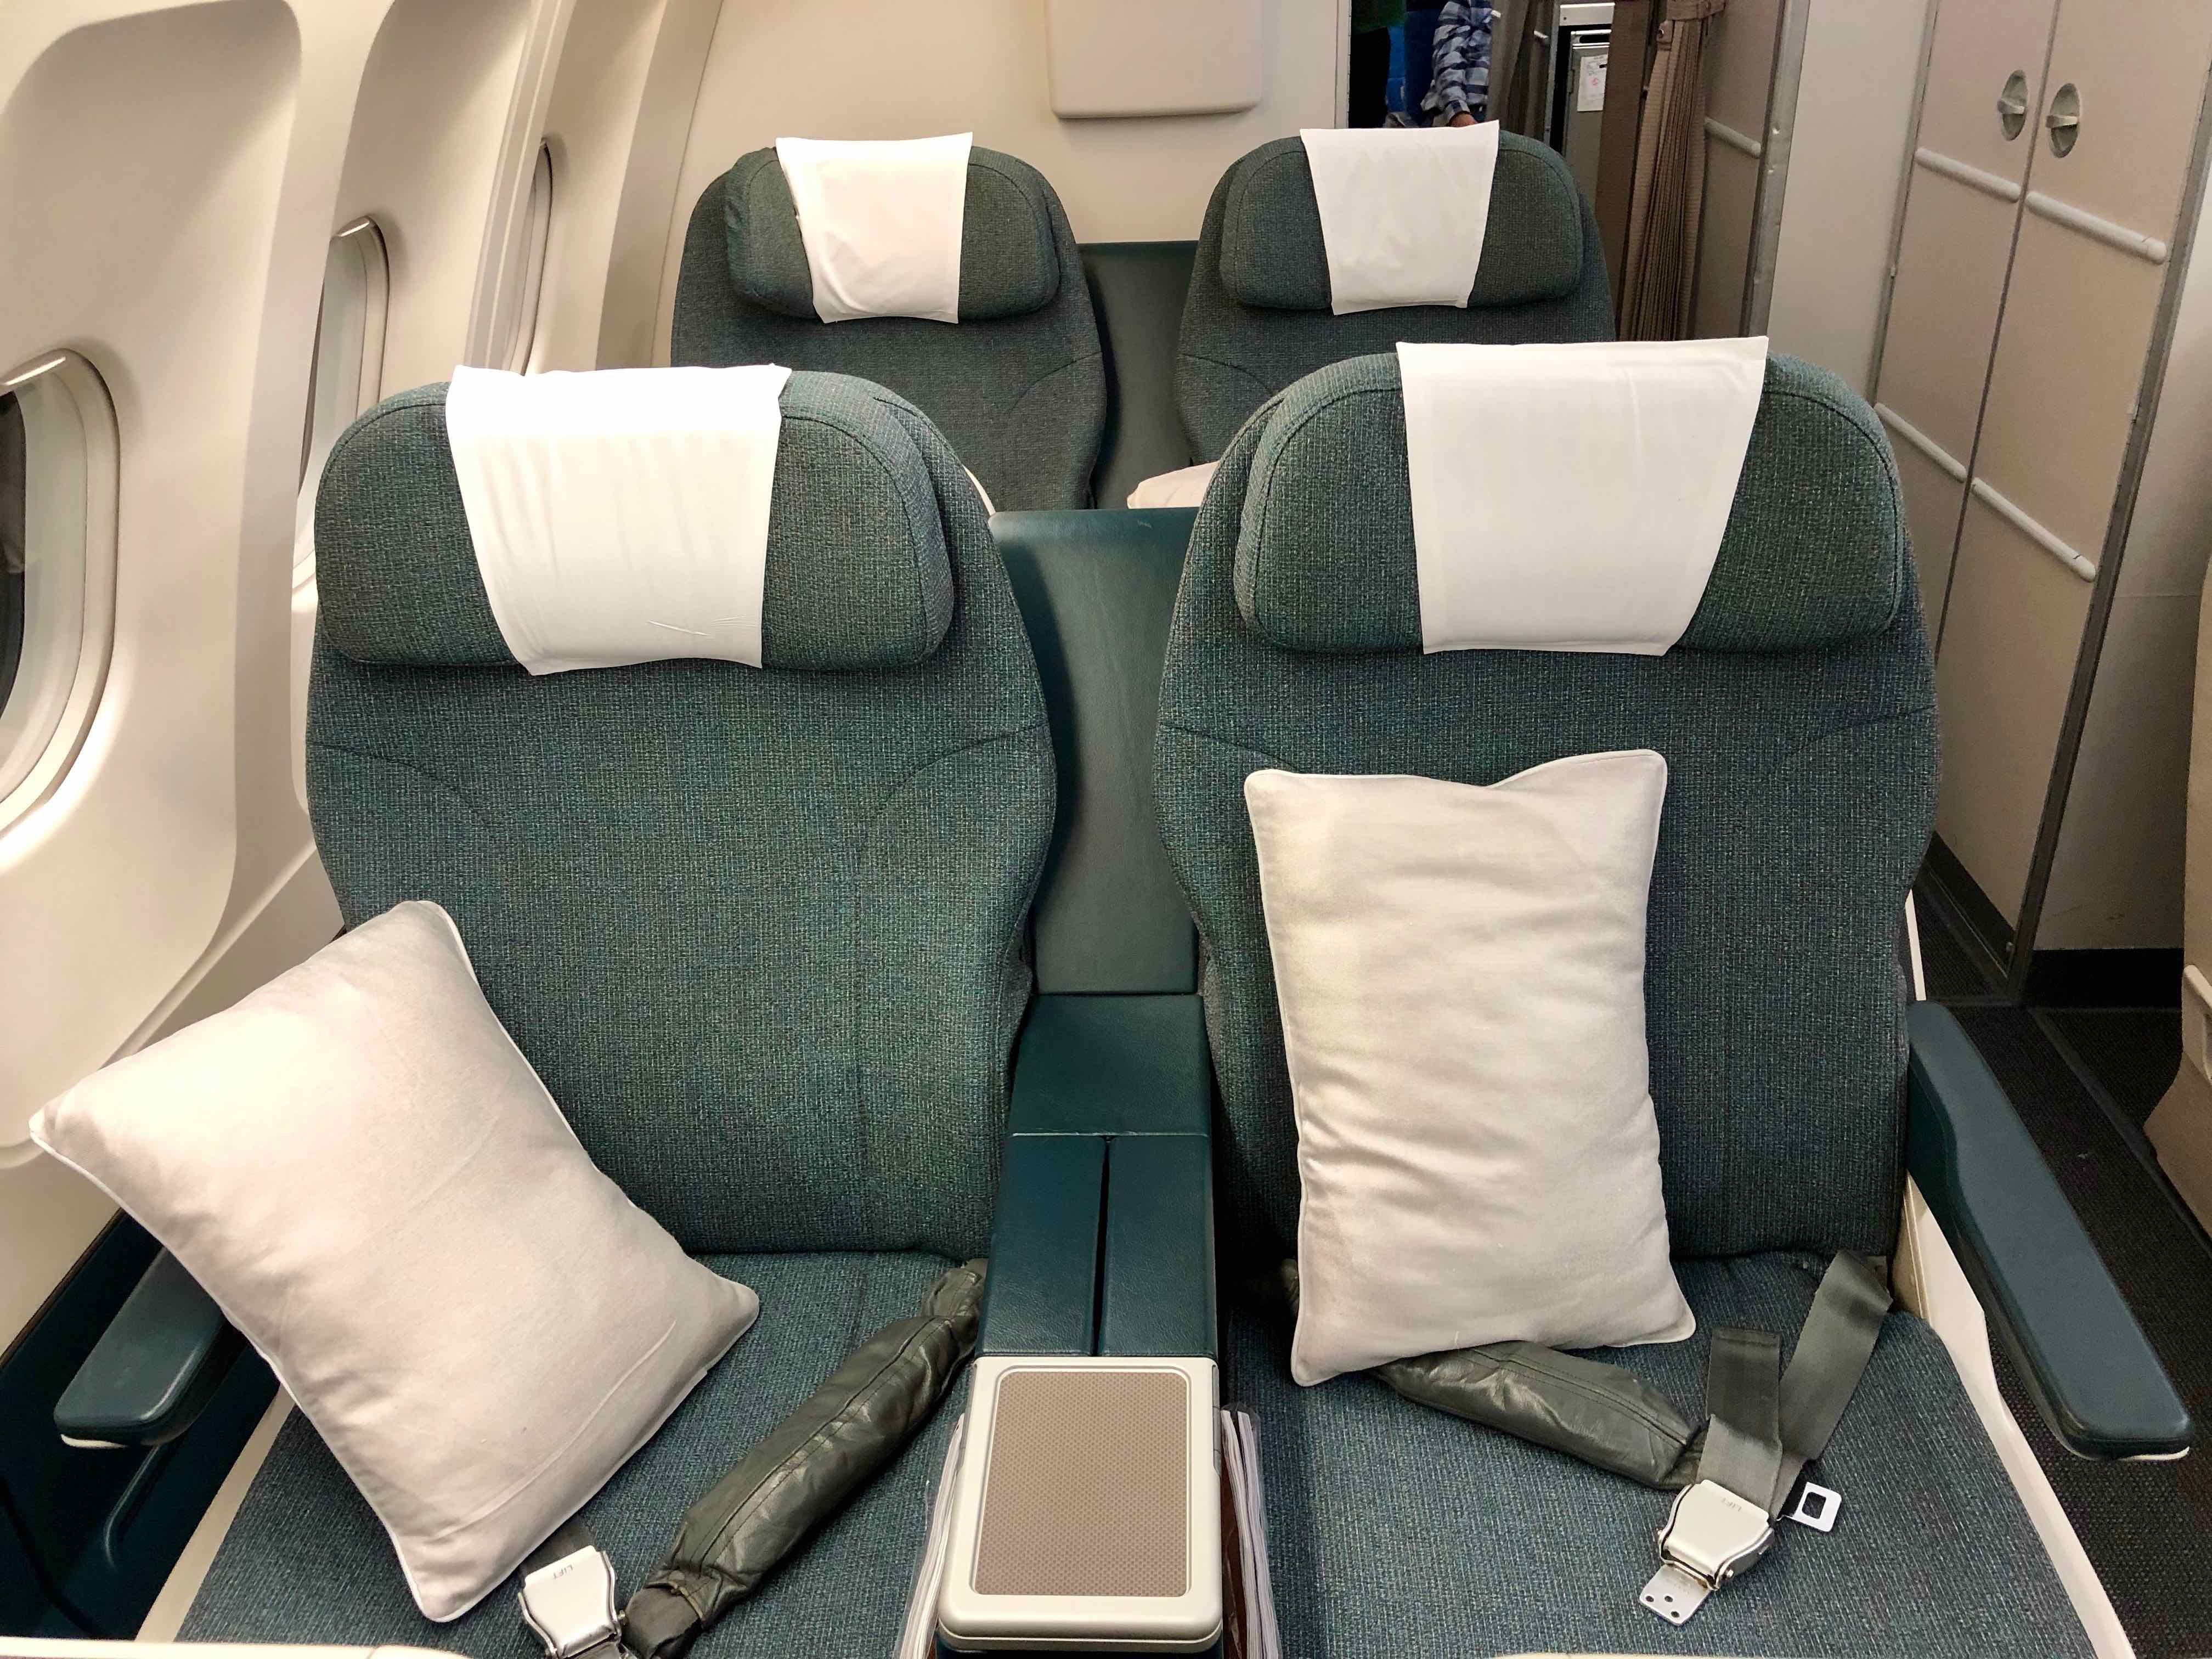 Cathay Dragon A330 Business Class overview | Point Hacks